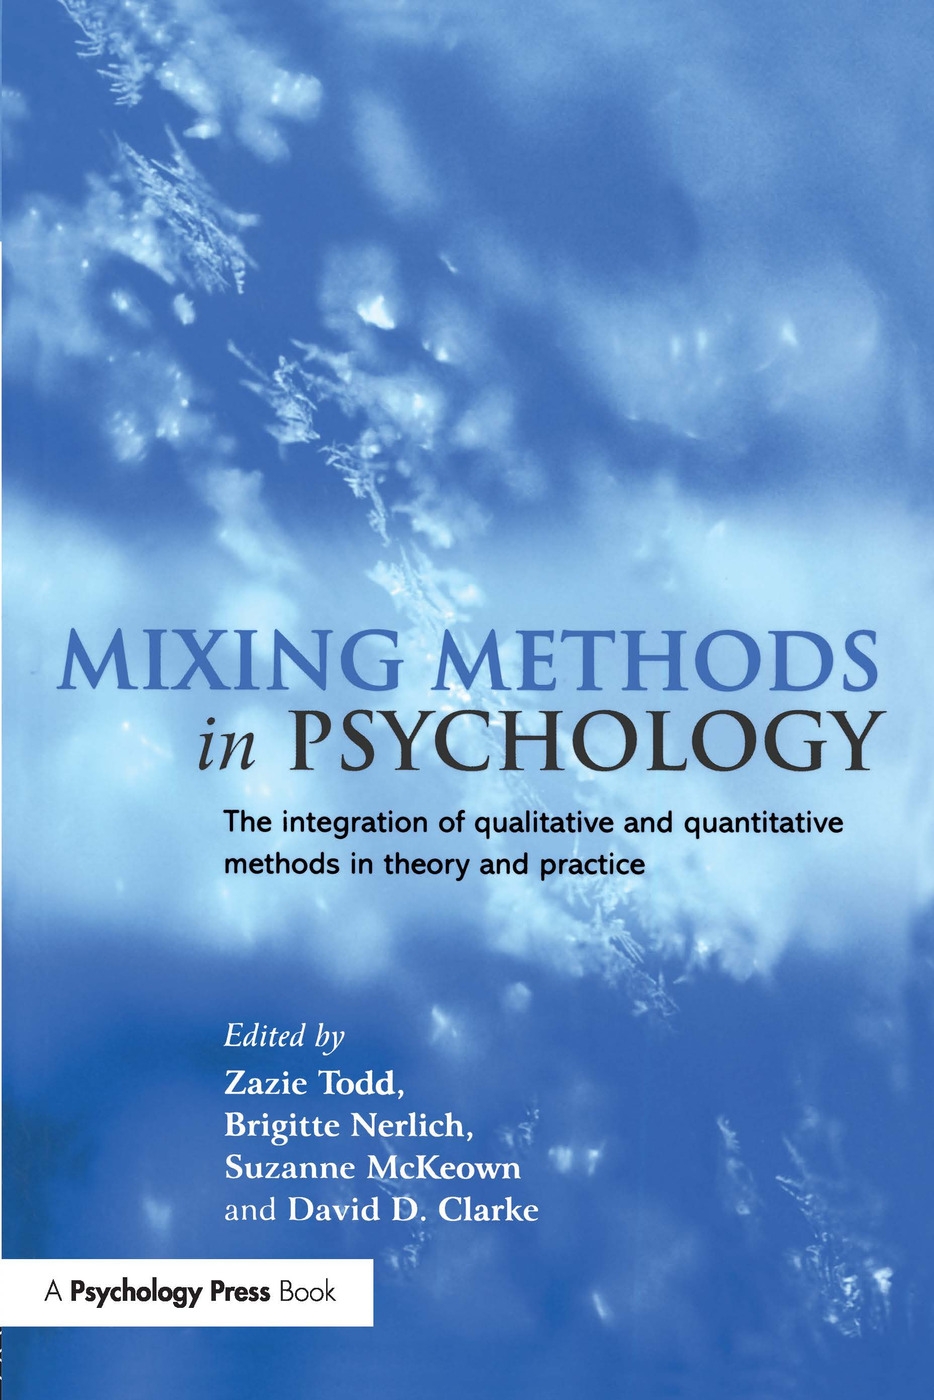 Mixing Methods in Psychology: The Integration of Qualitative and Quantitative Methods in Theory and Practice